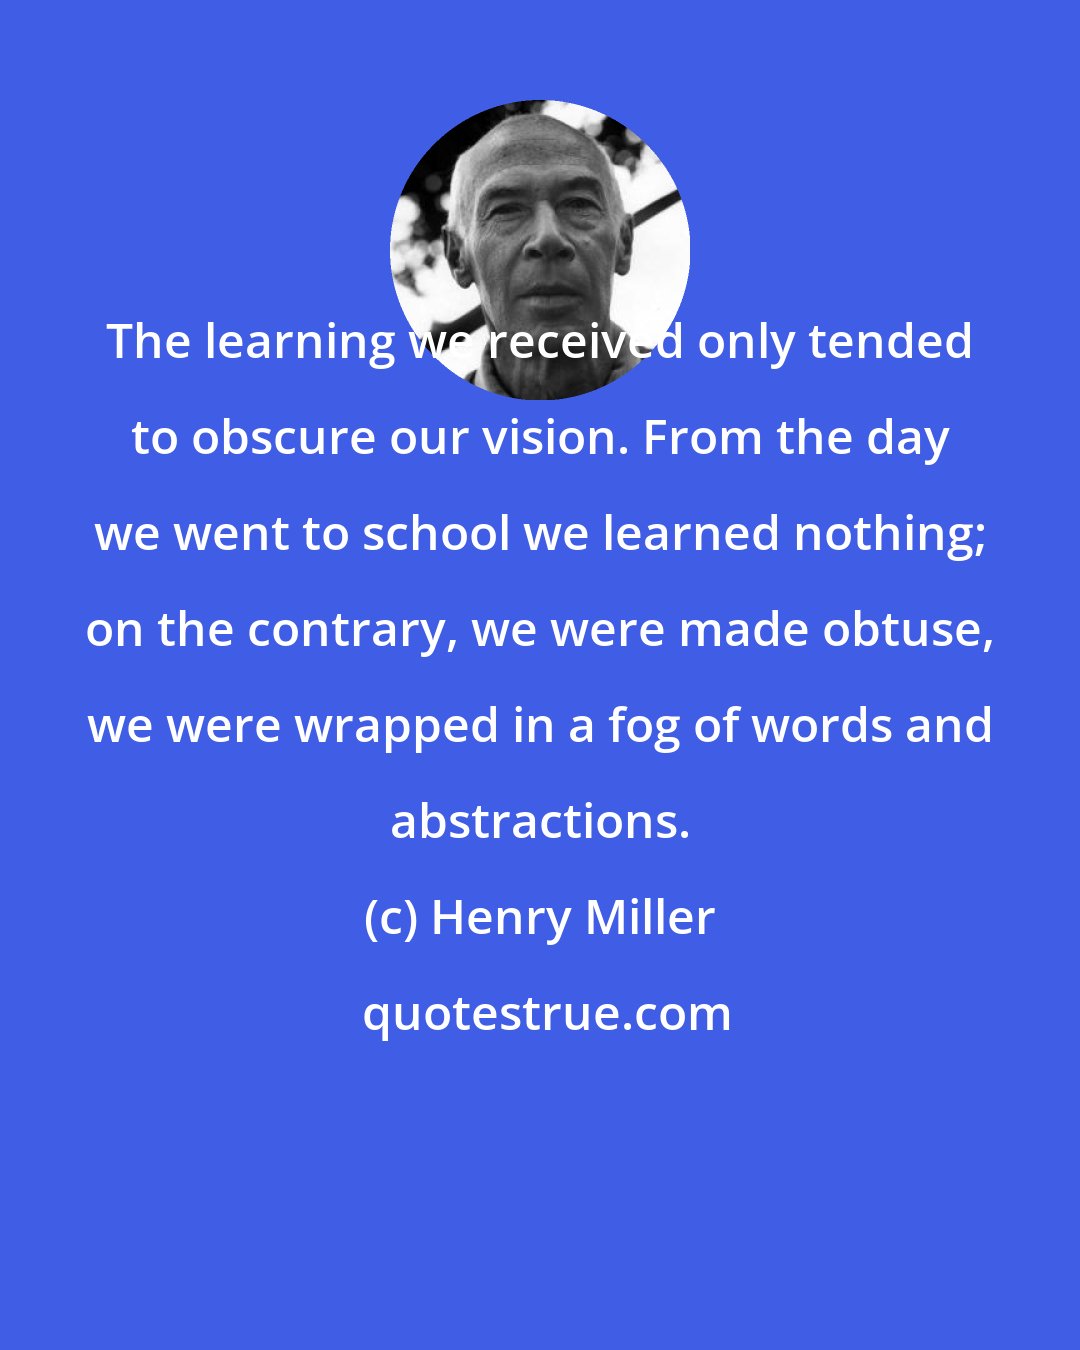 Henry Miller: The learning we received only tended to obscure our vision. From the day we went to school we learned nothing; on the contrary, we were made obtuse, we were wrapped in a fog of words and abstractions.